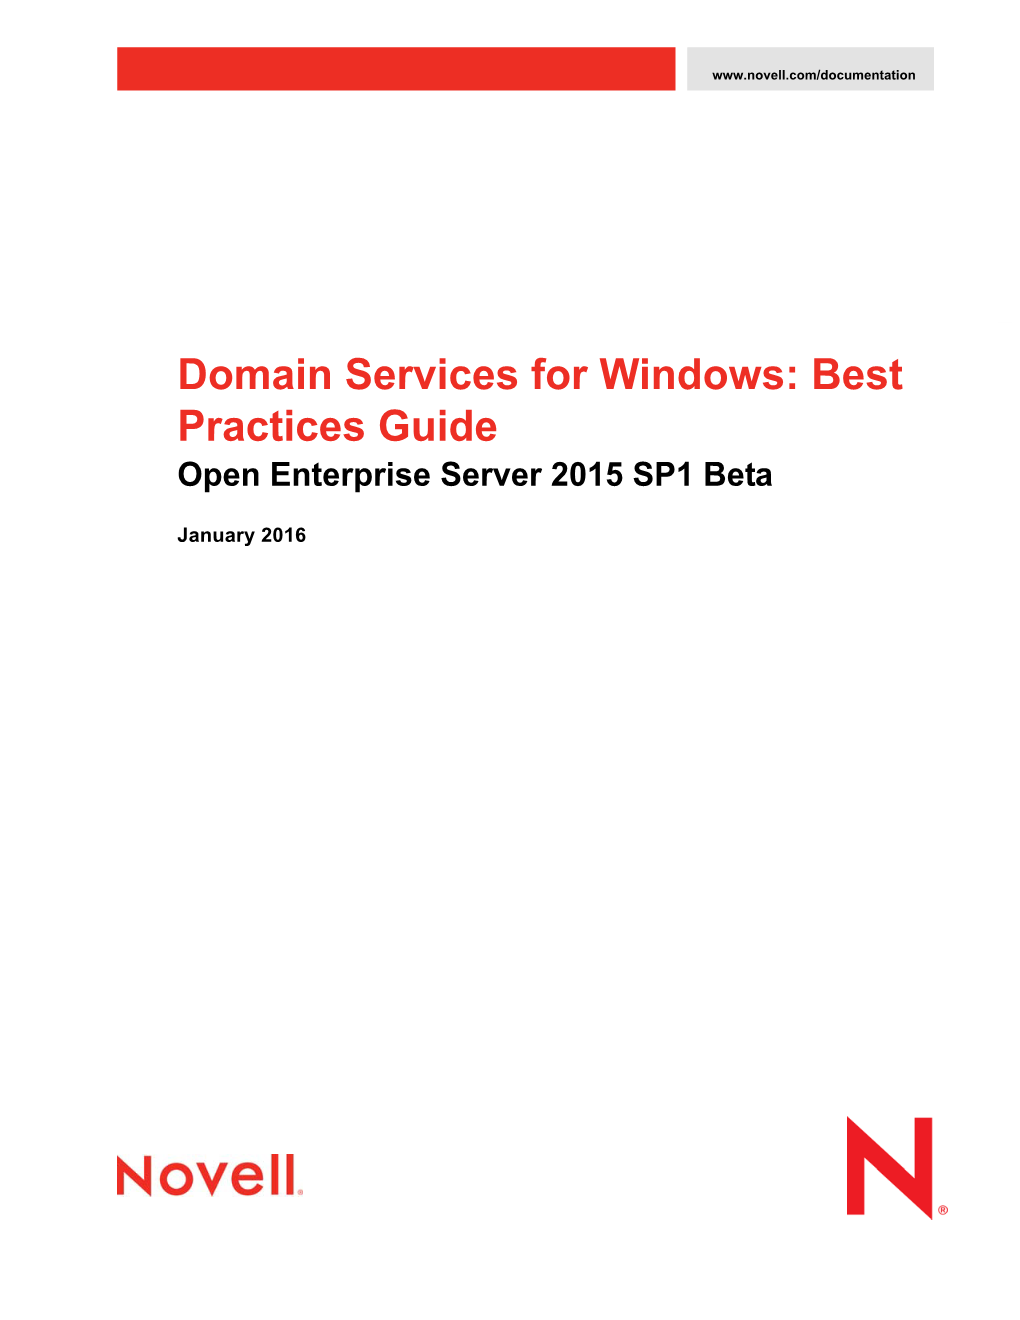 Novell Domain Services for Windows Best Practices Guide About This Guide